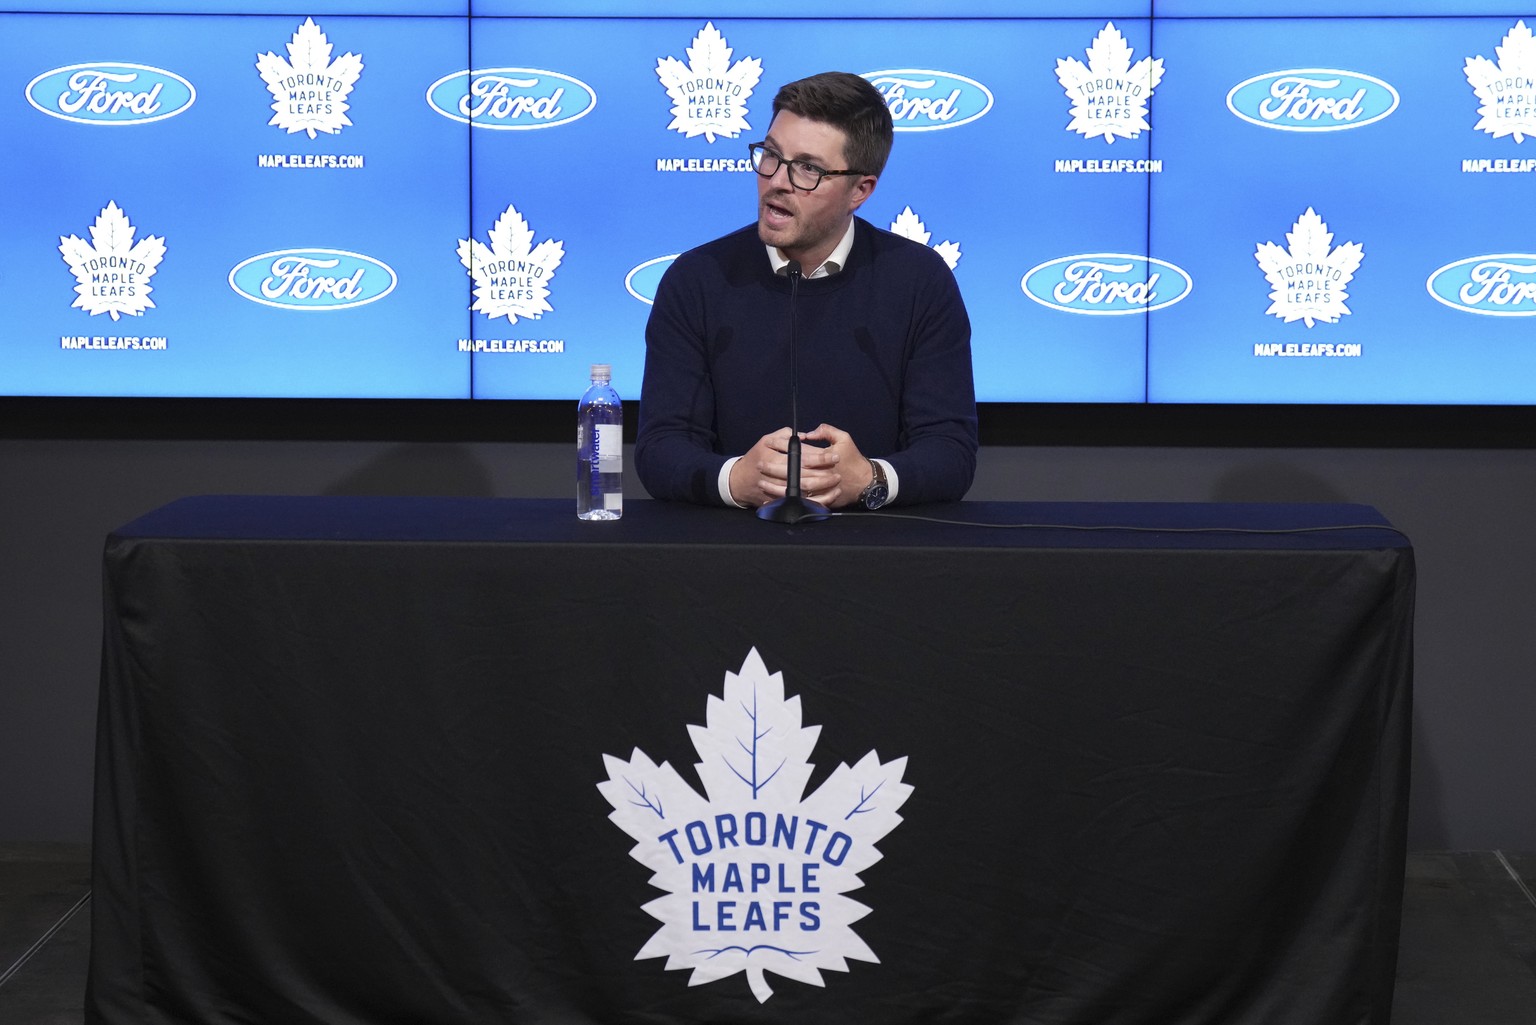 Toronto Maple Leafs general manager Kyle Dubas speaks to media during an end-of-season availability in Toronto, on Monday, May 15, 2023. The Maple Leafs were eliminated from the NHL playoffs by the Fl ...